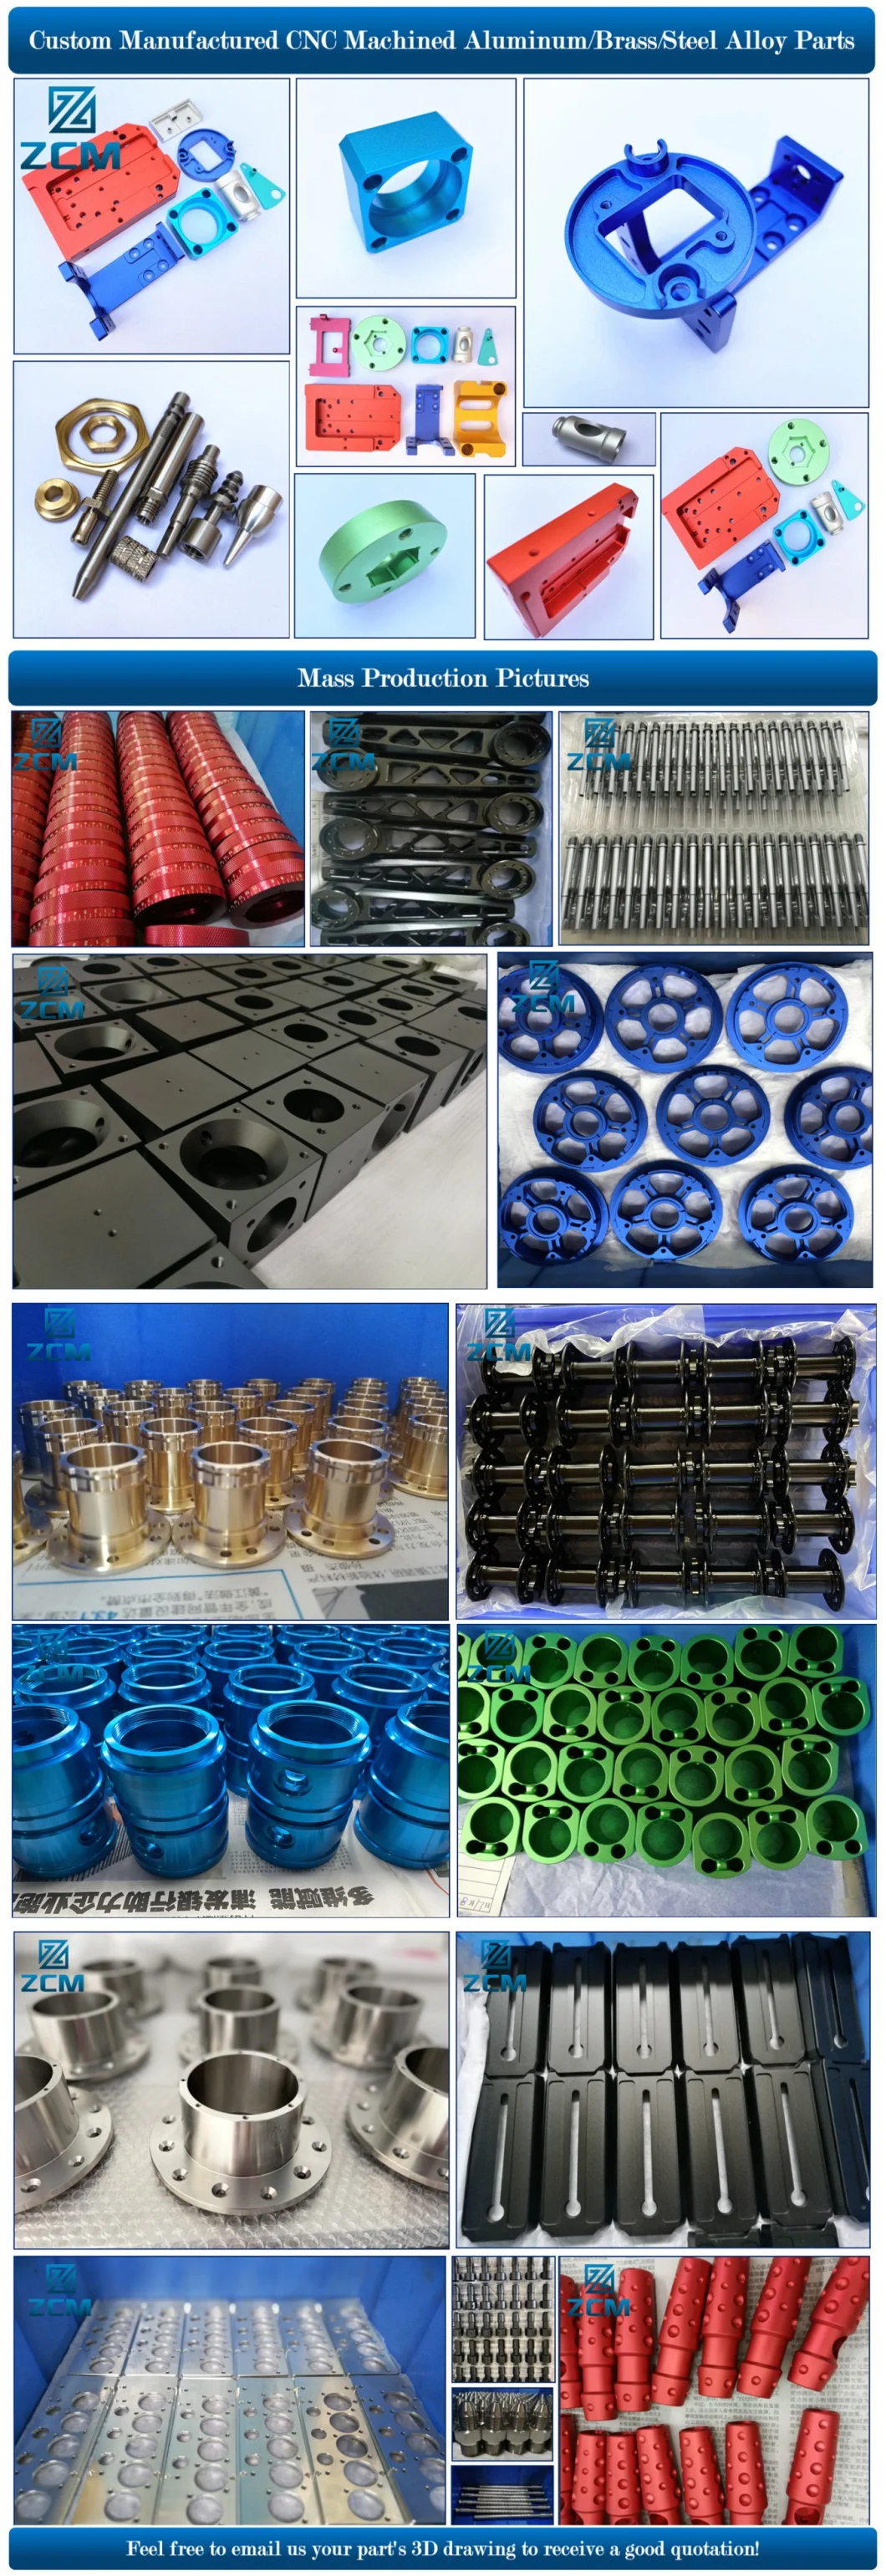 Shenzhen Advanced CNC Manufacturing Technology Custom Made Wire EDM/Wire Cut Black Plastic Gear Ship/Boat/Vessel Steering Gear Engine Parts